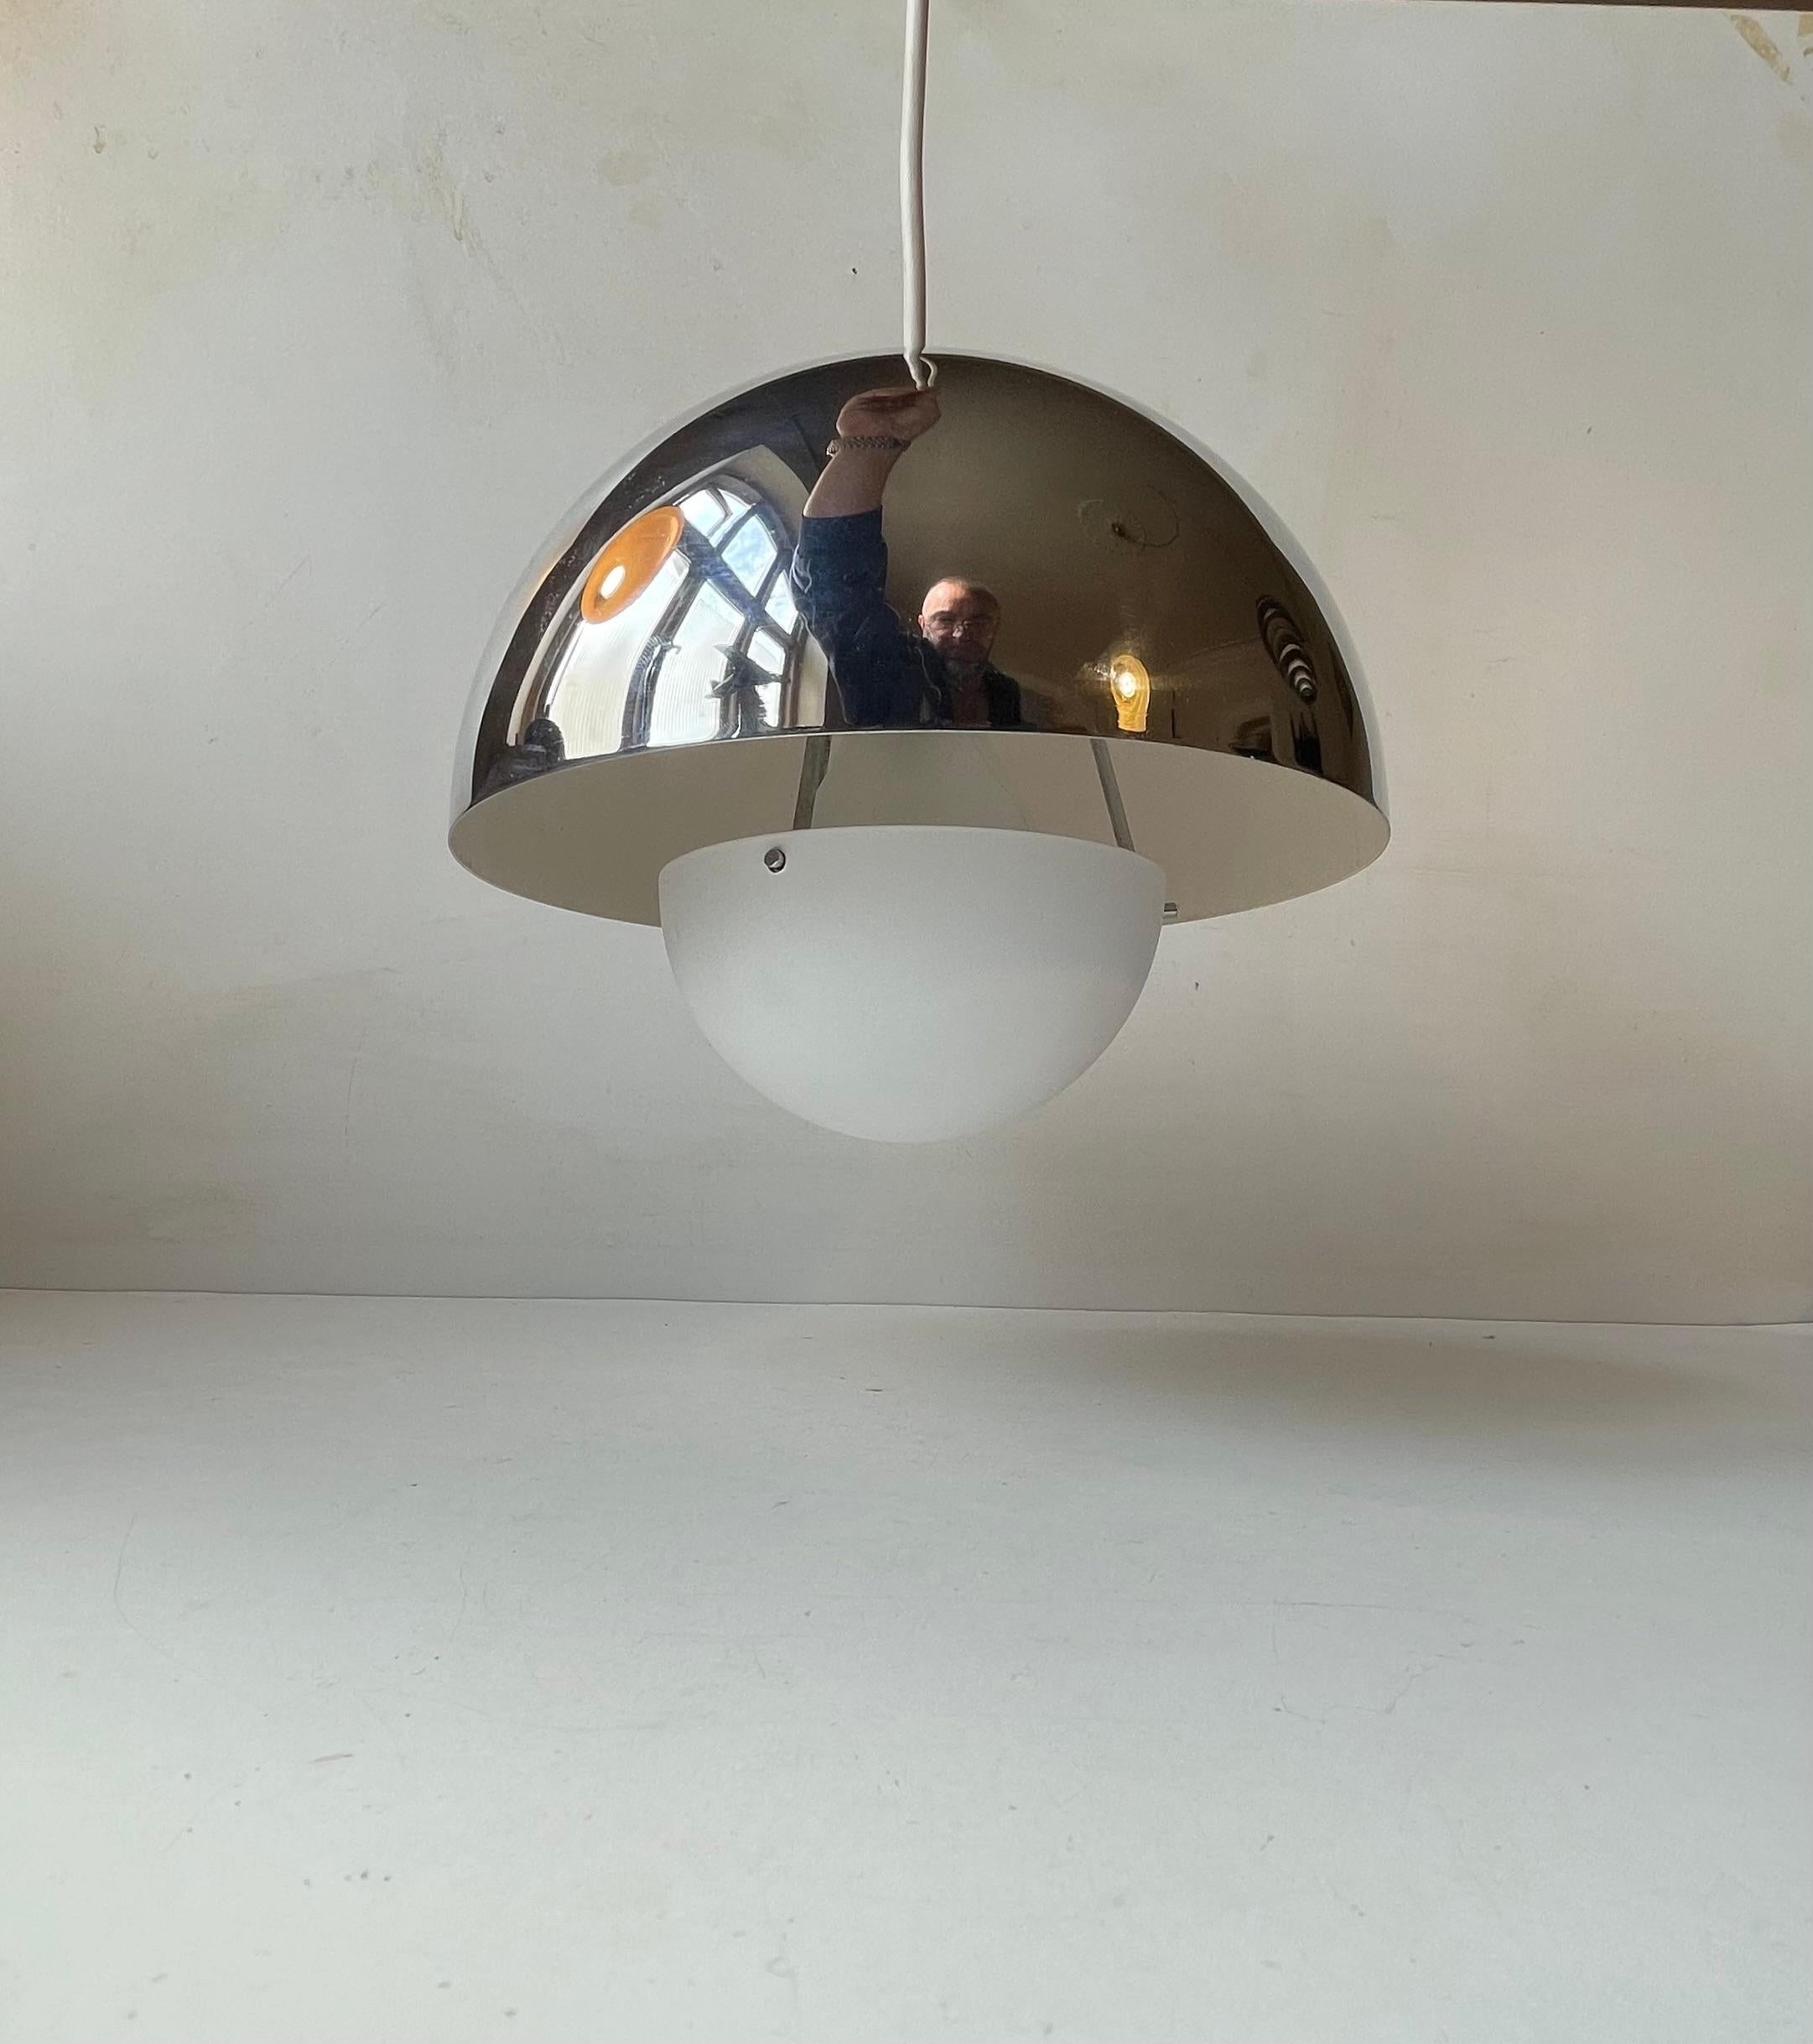 A rare dual colored flowerpot featuring mirror chrome finished top-shade and matte white bottom shade. The flower pot VP1 pendant light was designed by Verner Panton in 1967. This one being an early example from the 1970s was manufactured by Louis